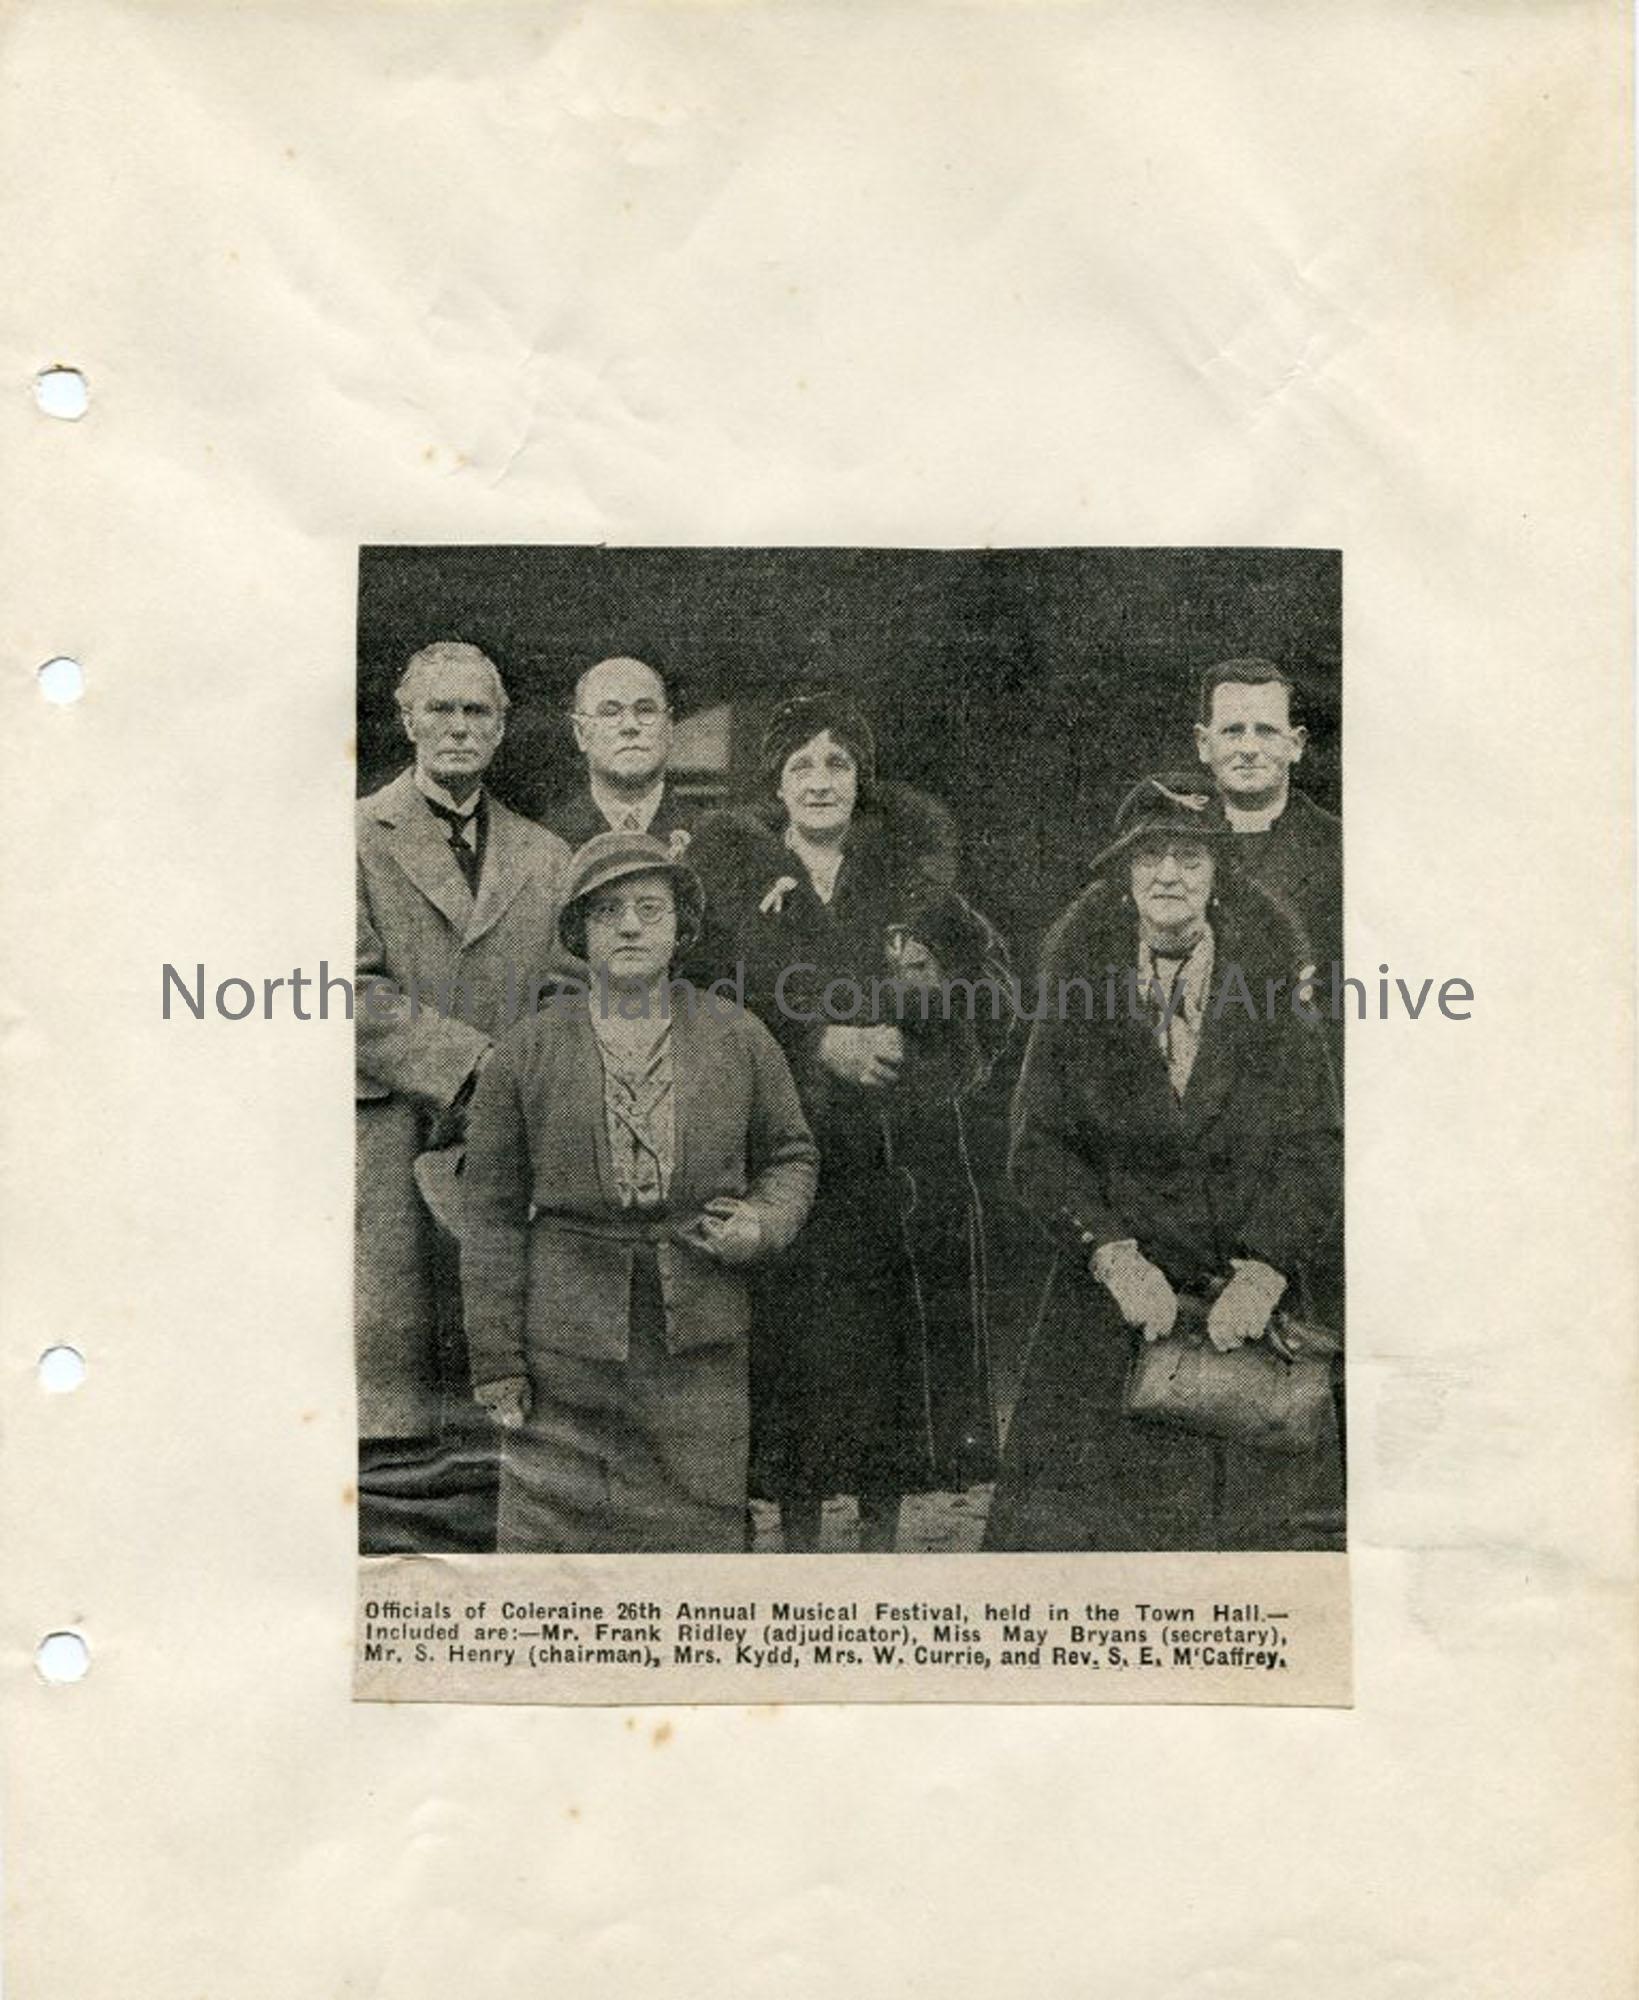 Photograph from newspaper – Coleraine Music Festival Officials